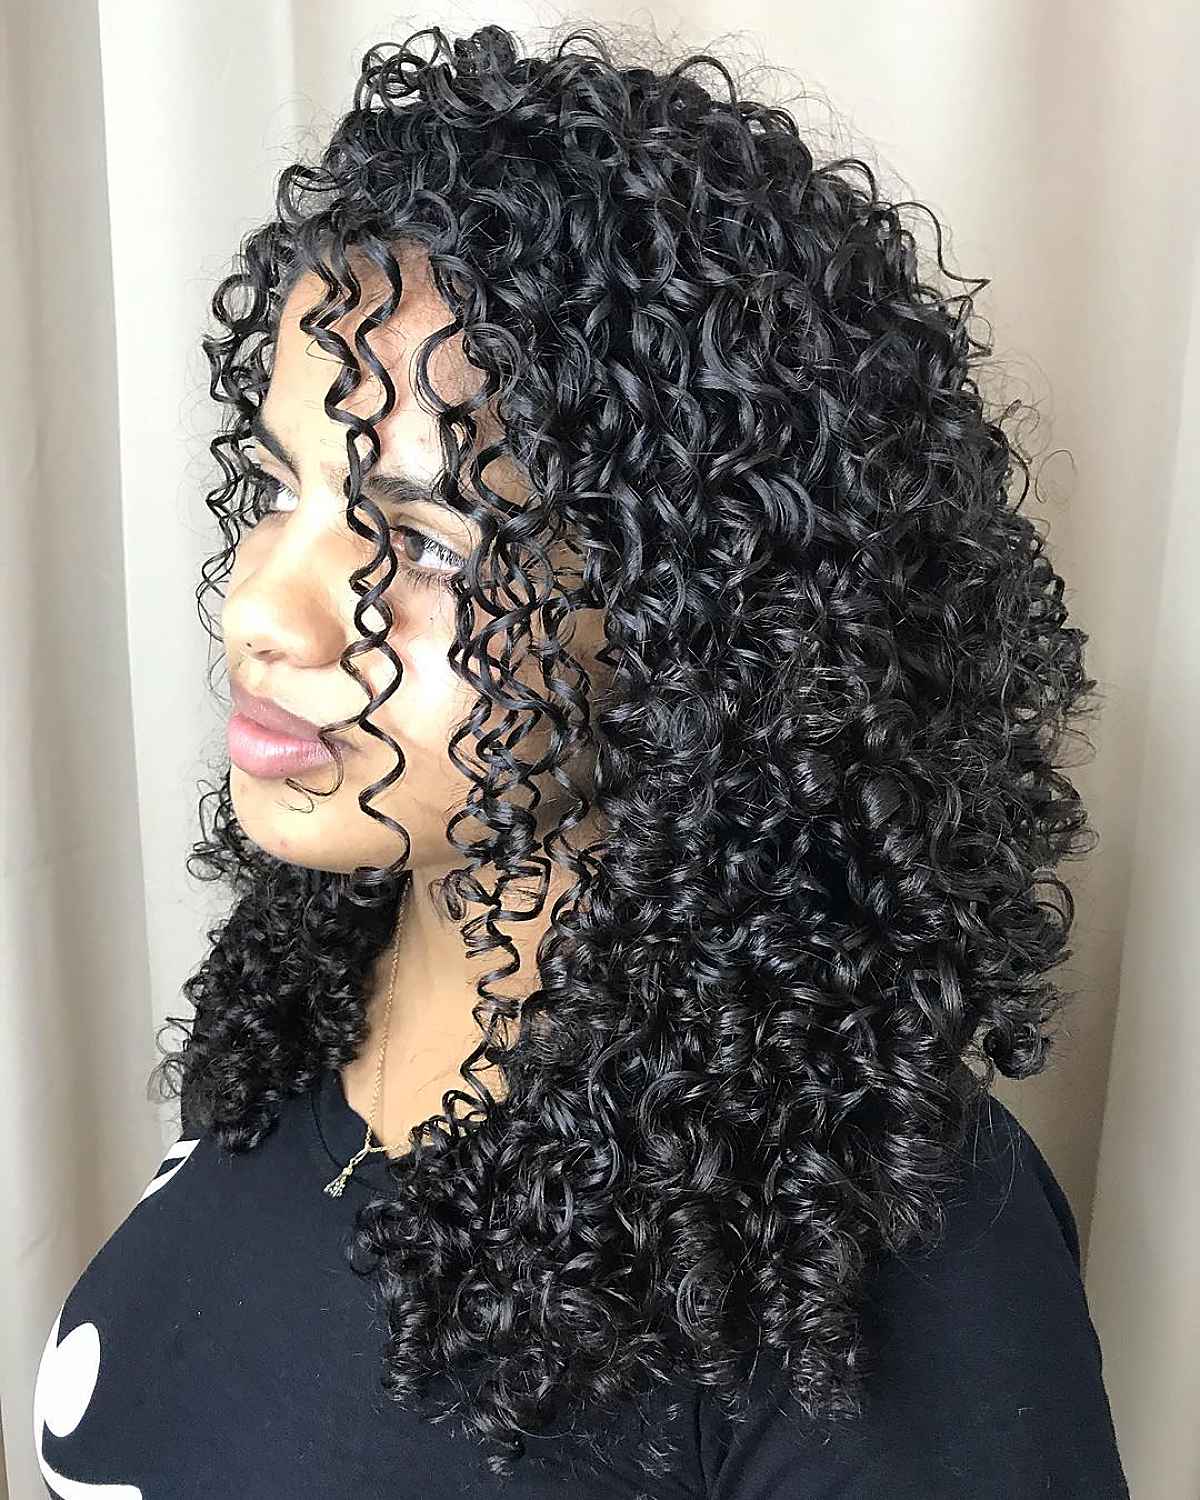 Long and Curly Black Tresses